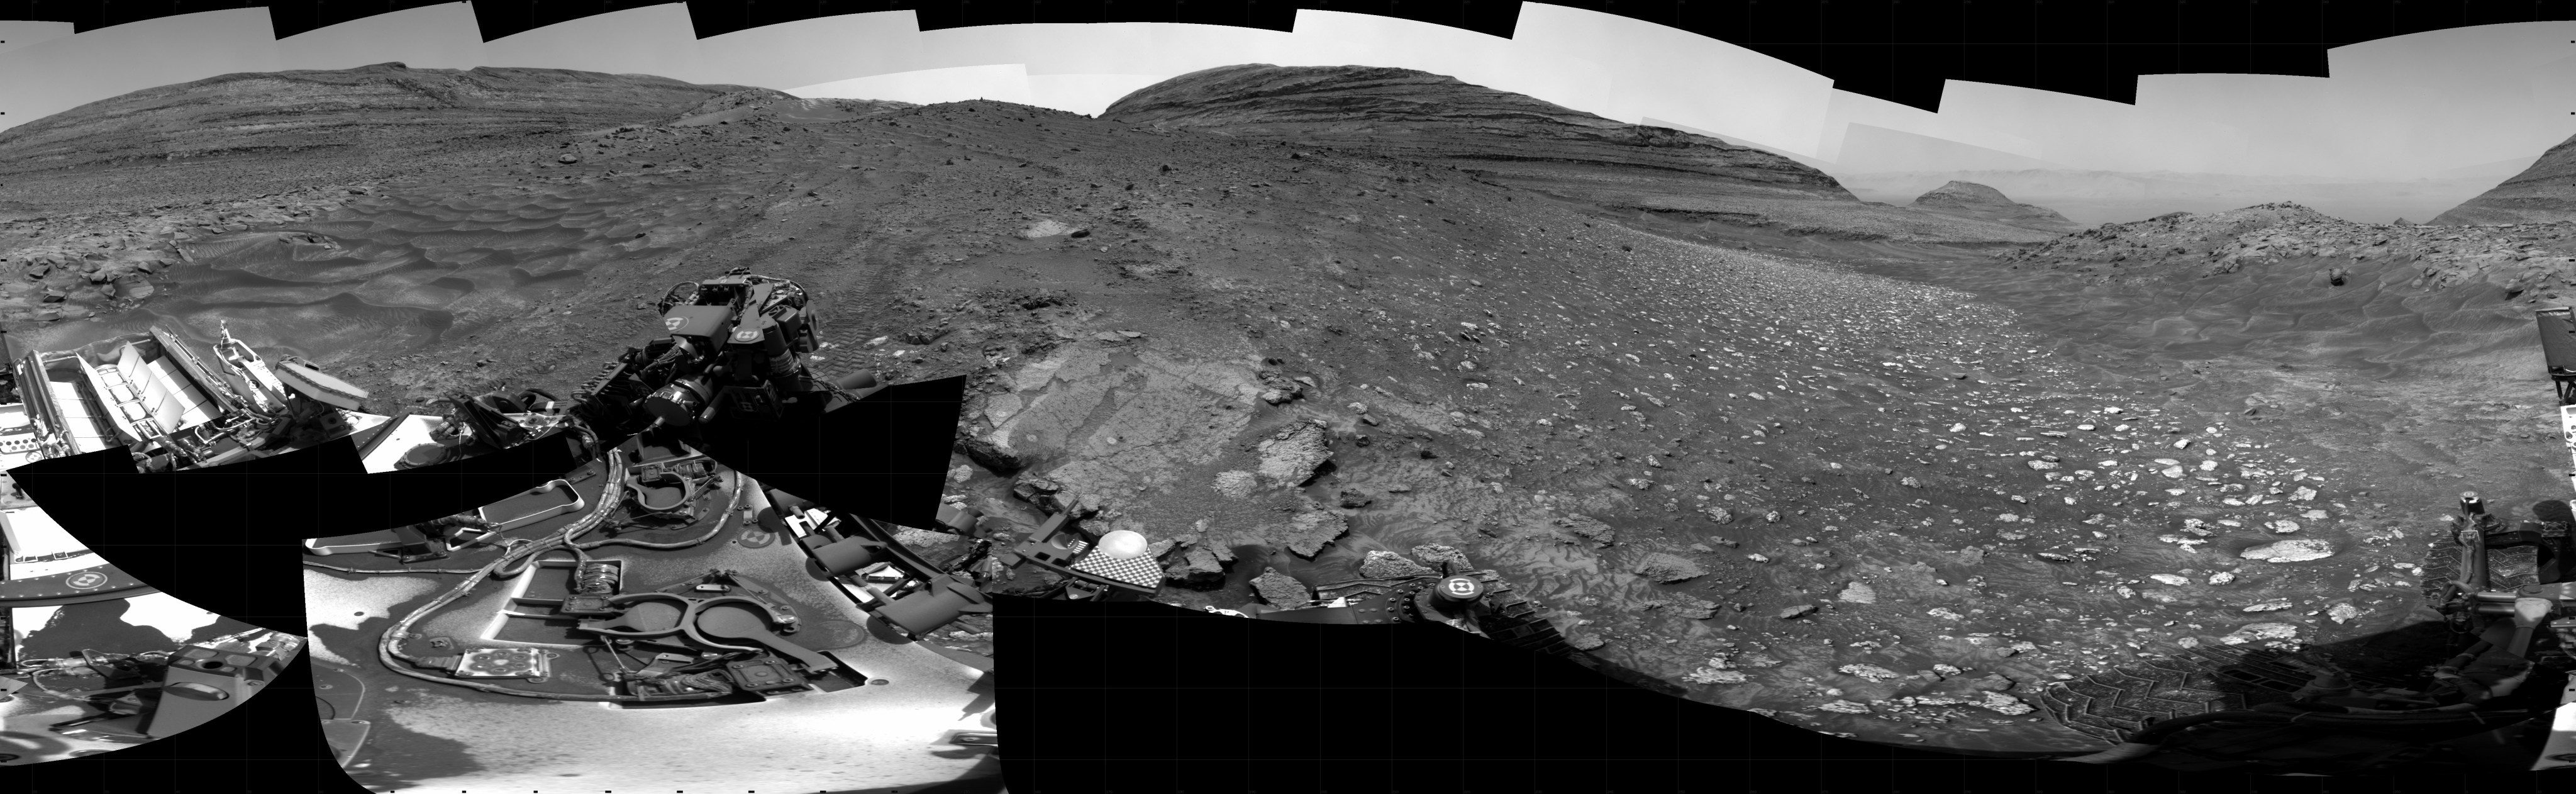 A panoramic black and white image of the Martian landscape before the Curiosity rover. Wind-sculpted, wavy sand dunes appear at far left, while fields of scattered jagged and broken rocks cover the rest of the foreground, while the background is dominated by three large buttes of layered rock.